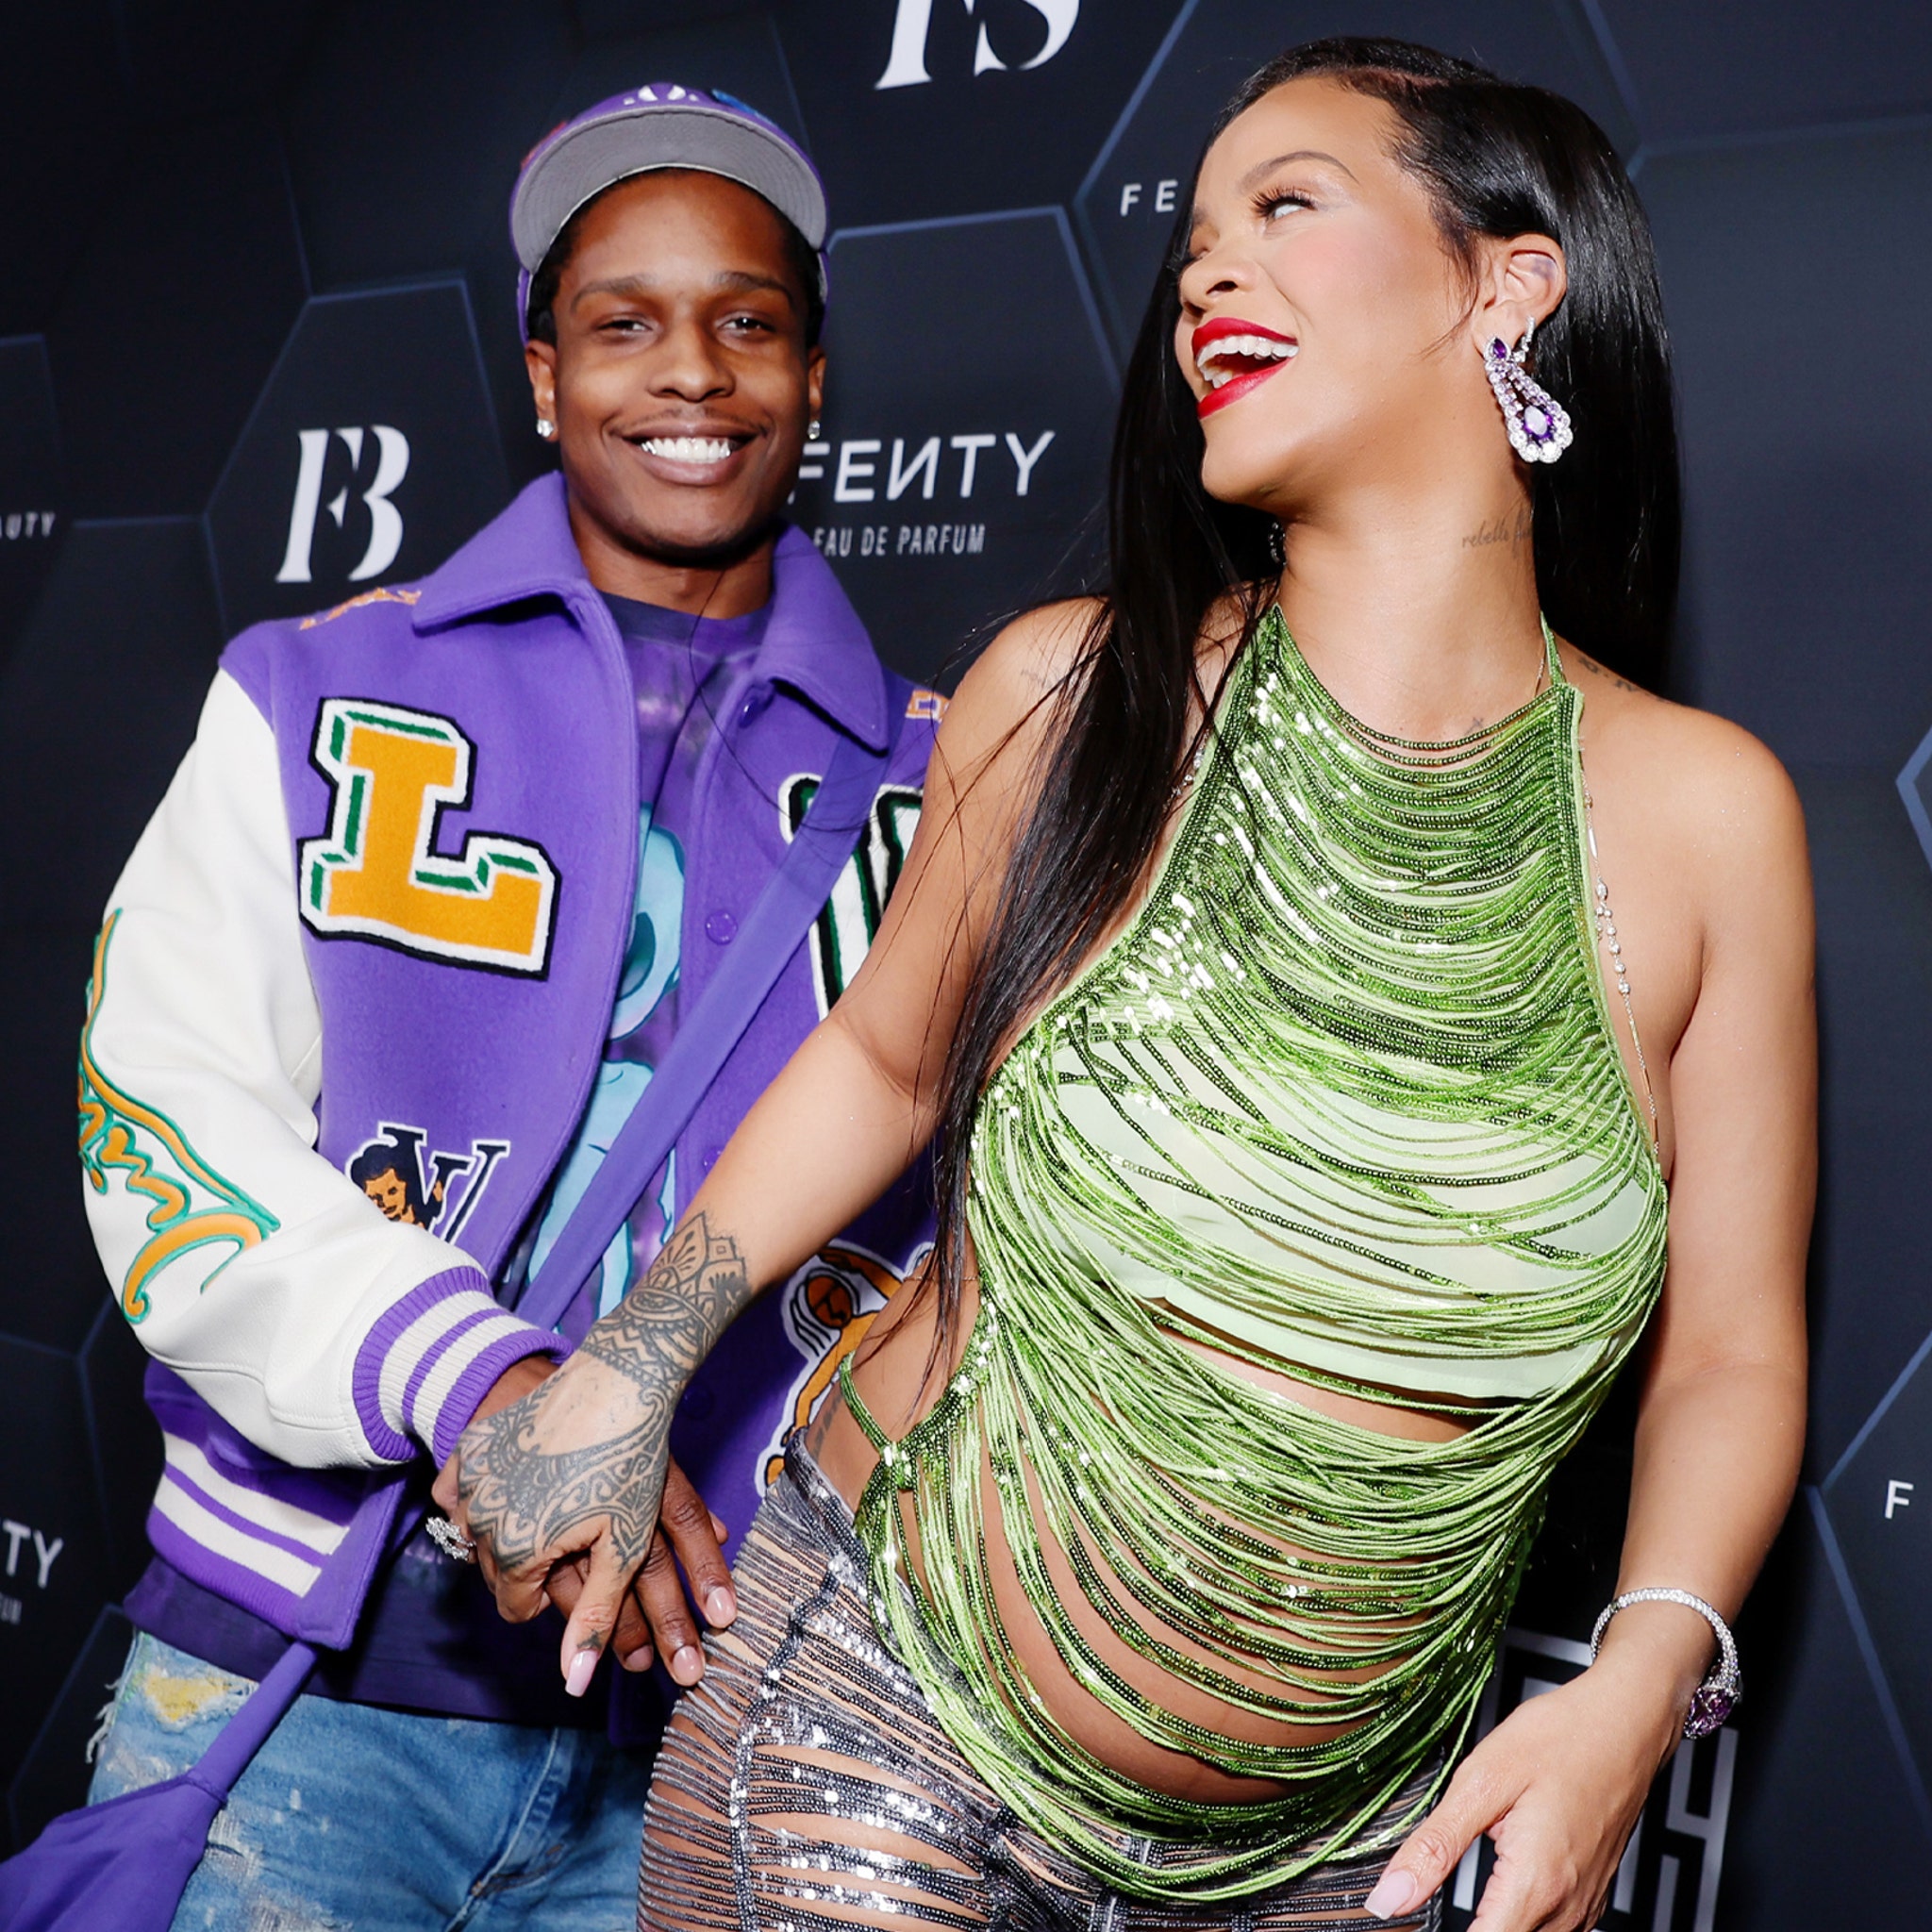 Kendall Jenner & A$AP Rocky dating: Relationship News & Pictures